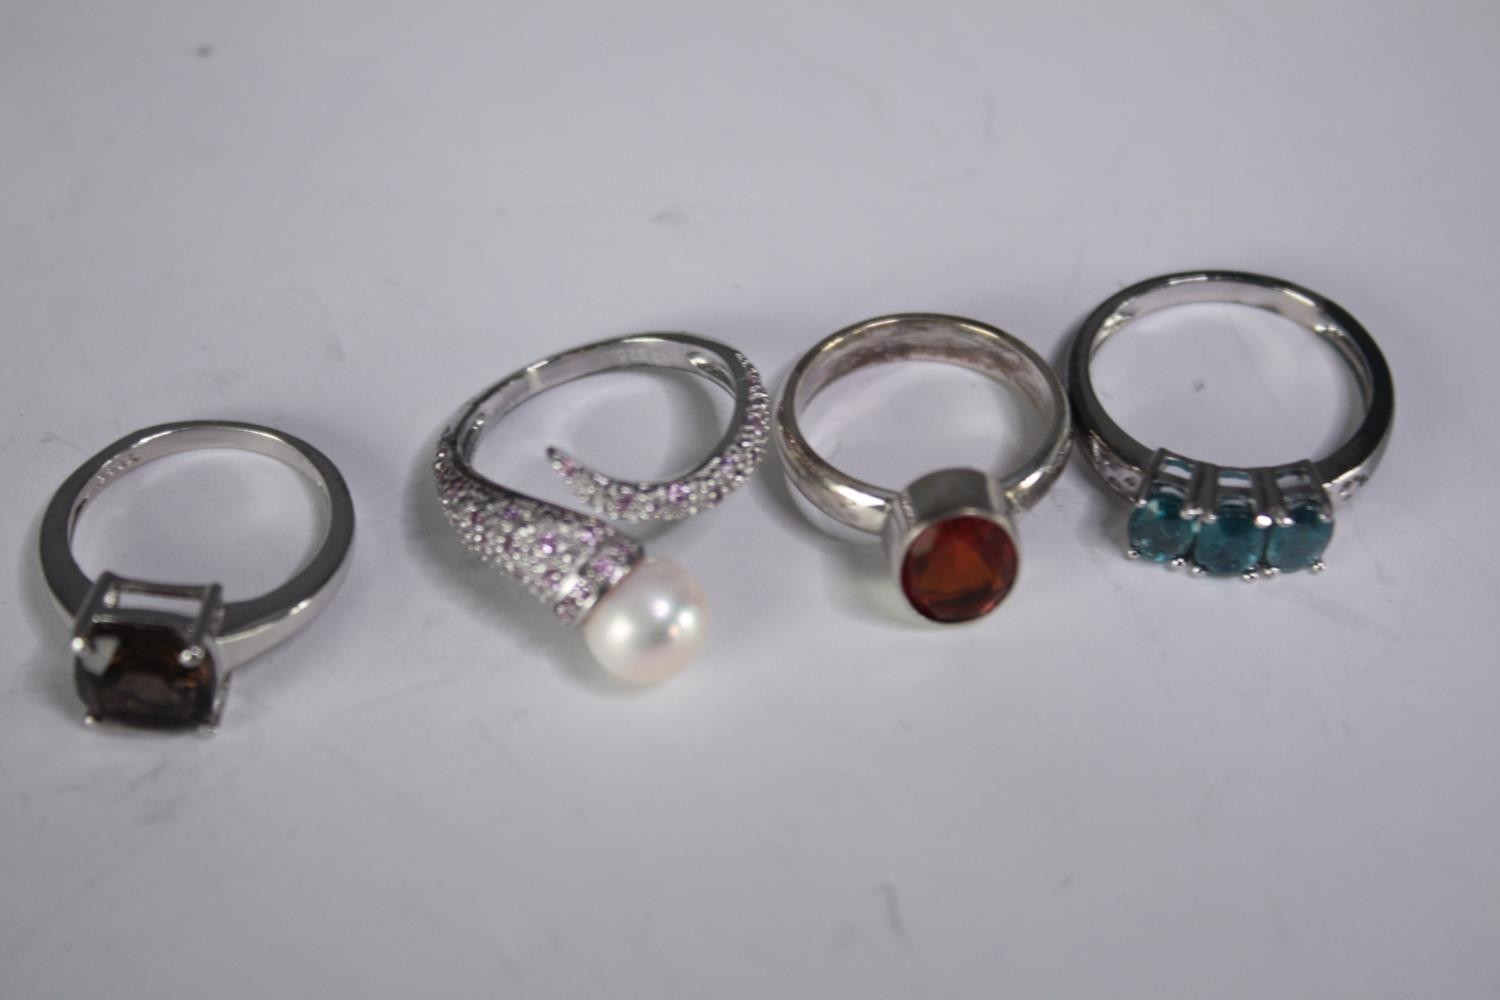 A collection of ten silver gem-set rings of various designs. Set with Fire opal, Turquoise, - Image 4 of 5